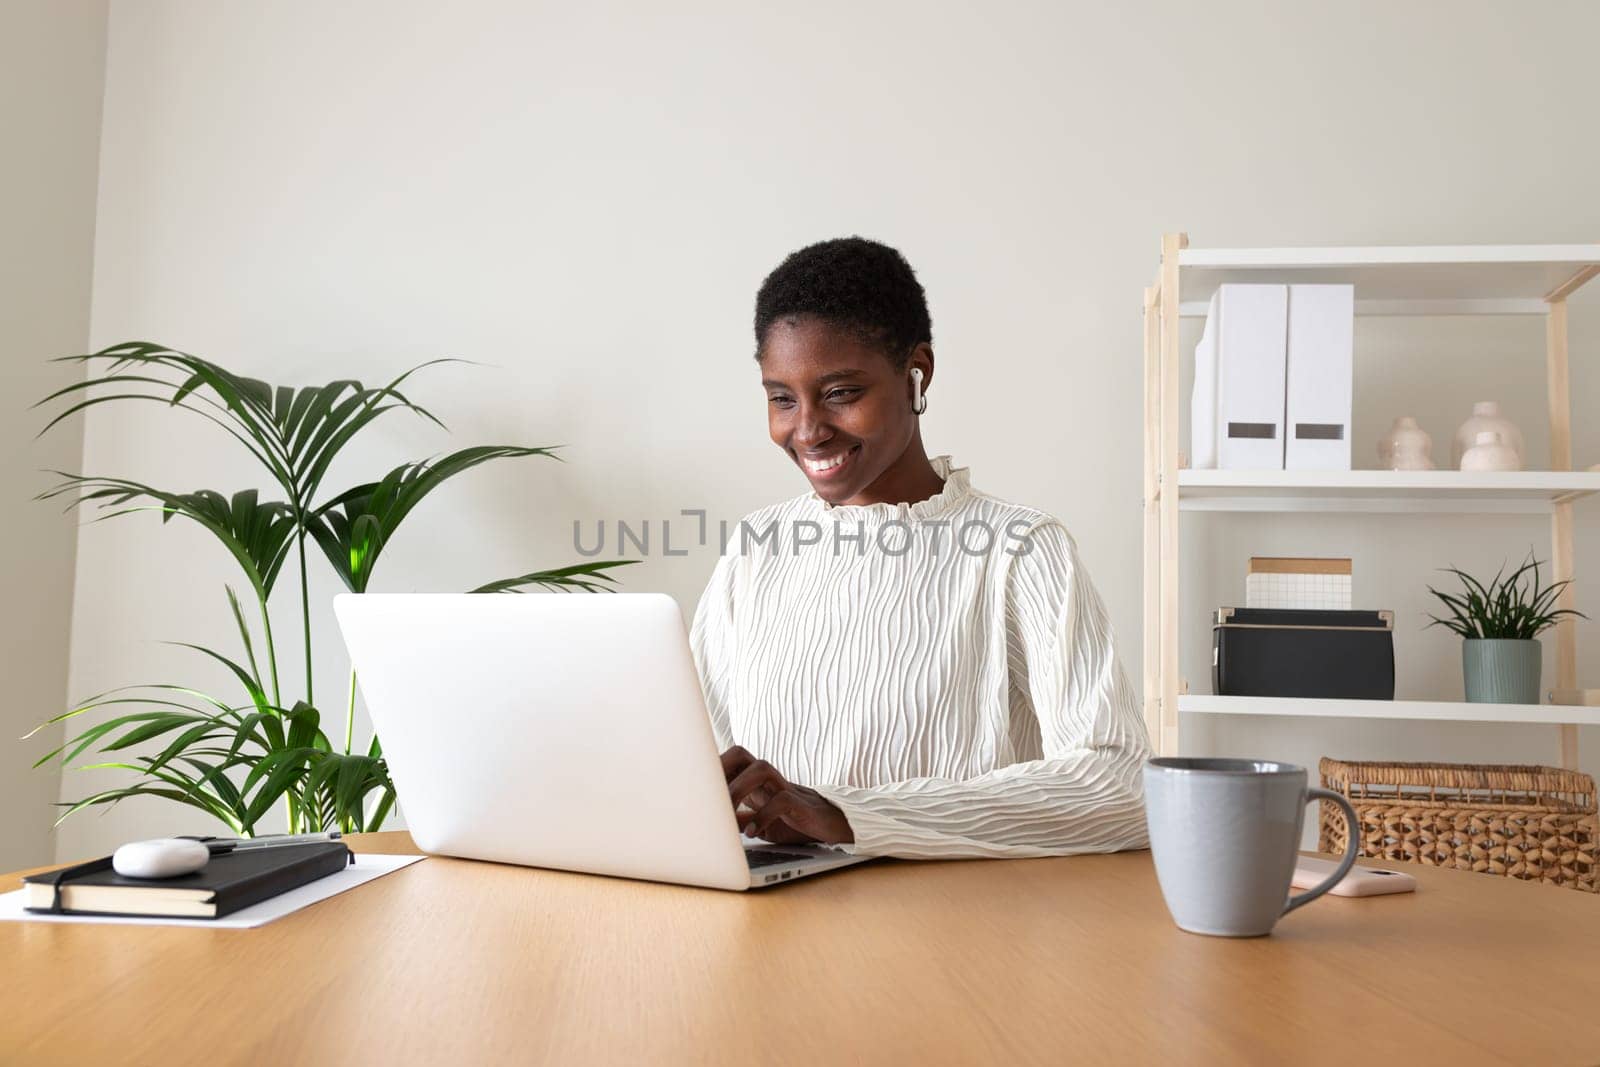 Black female entrepreneur working at home office. Happy African American woman using laptop and wireless earphones. Working from home concept.